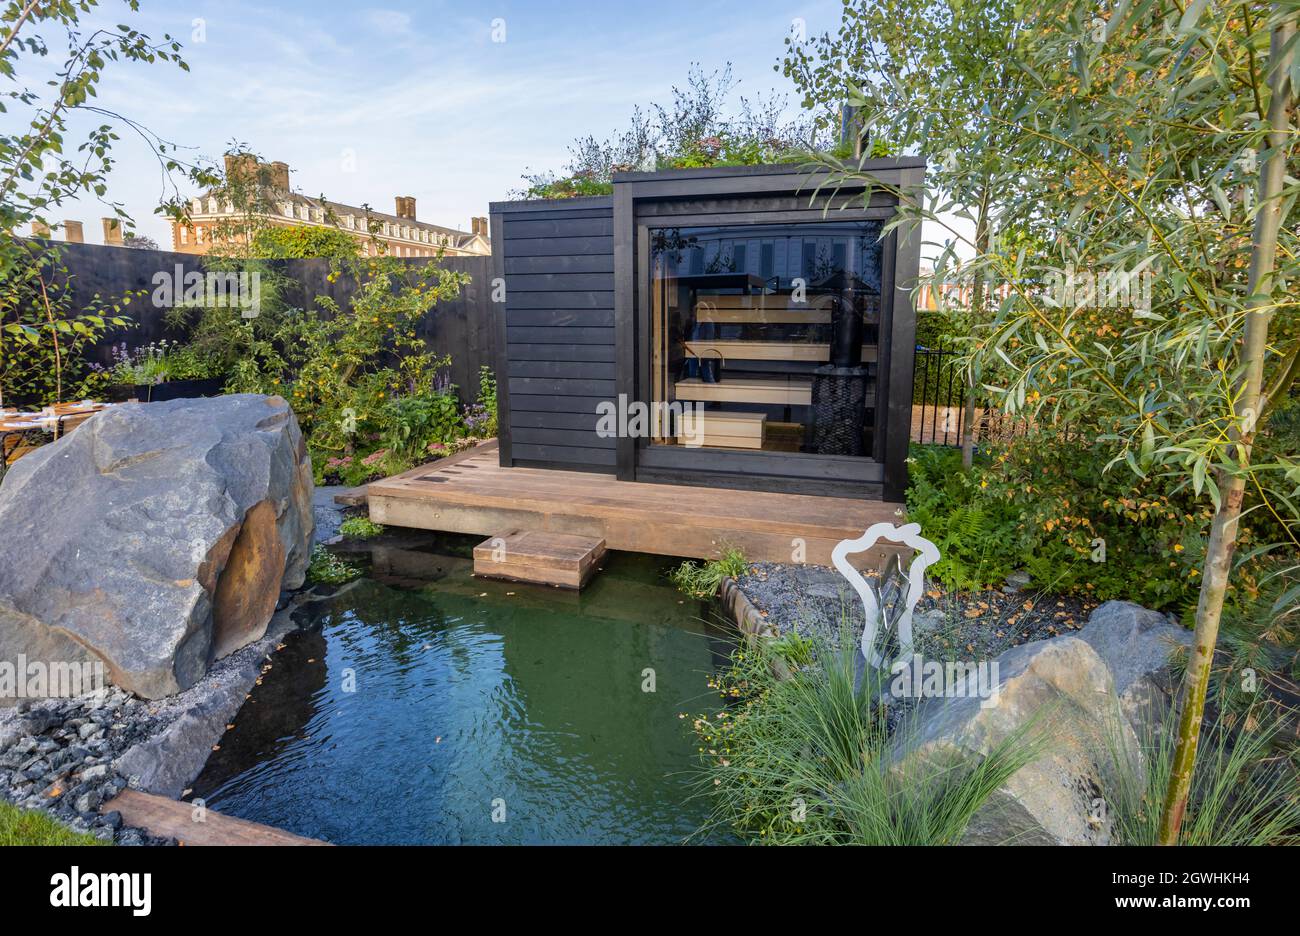 The Finnish Soul Garden Sanctuary Garden at RHS Chelsea Flower Show, held in the grounds of the Royal Hospital Chelsea, London SW3 in September 2021 Stock Photo